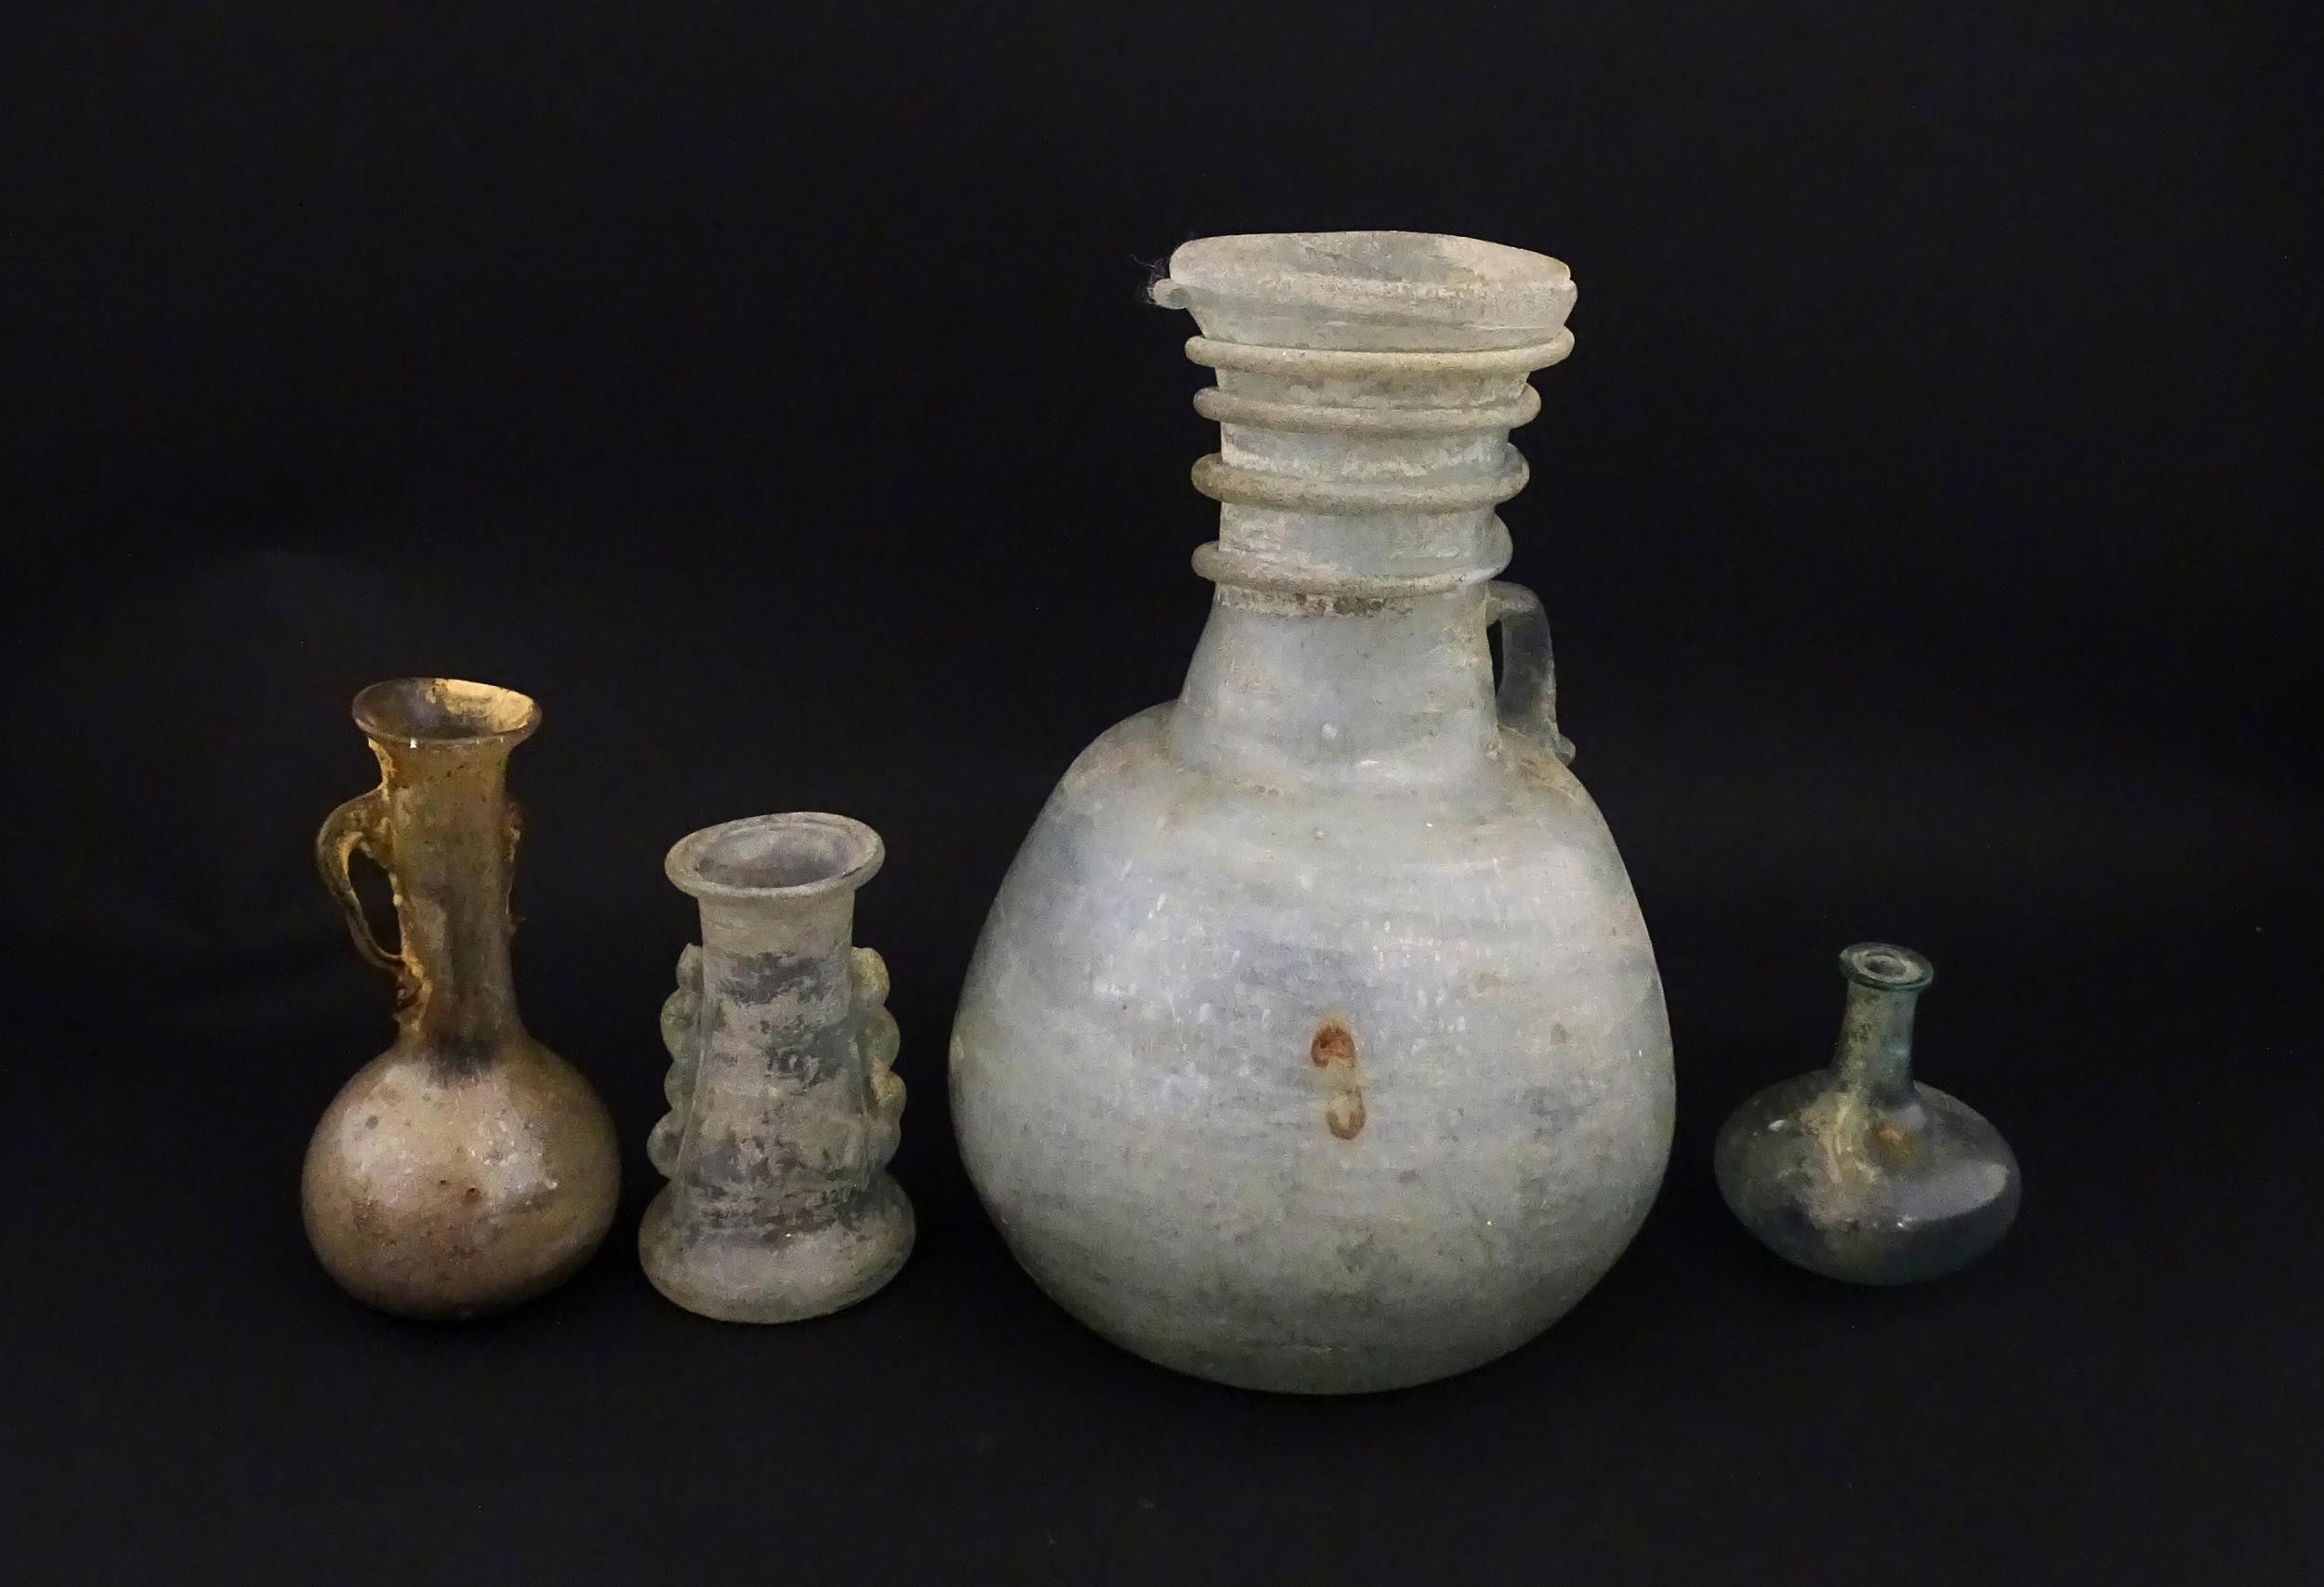 Four glass vases in the Roman style with iridescent finish, some with trail detail. Largest - Image 4 of 6